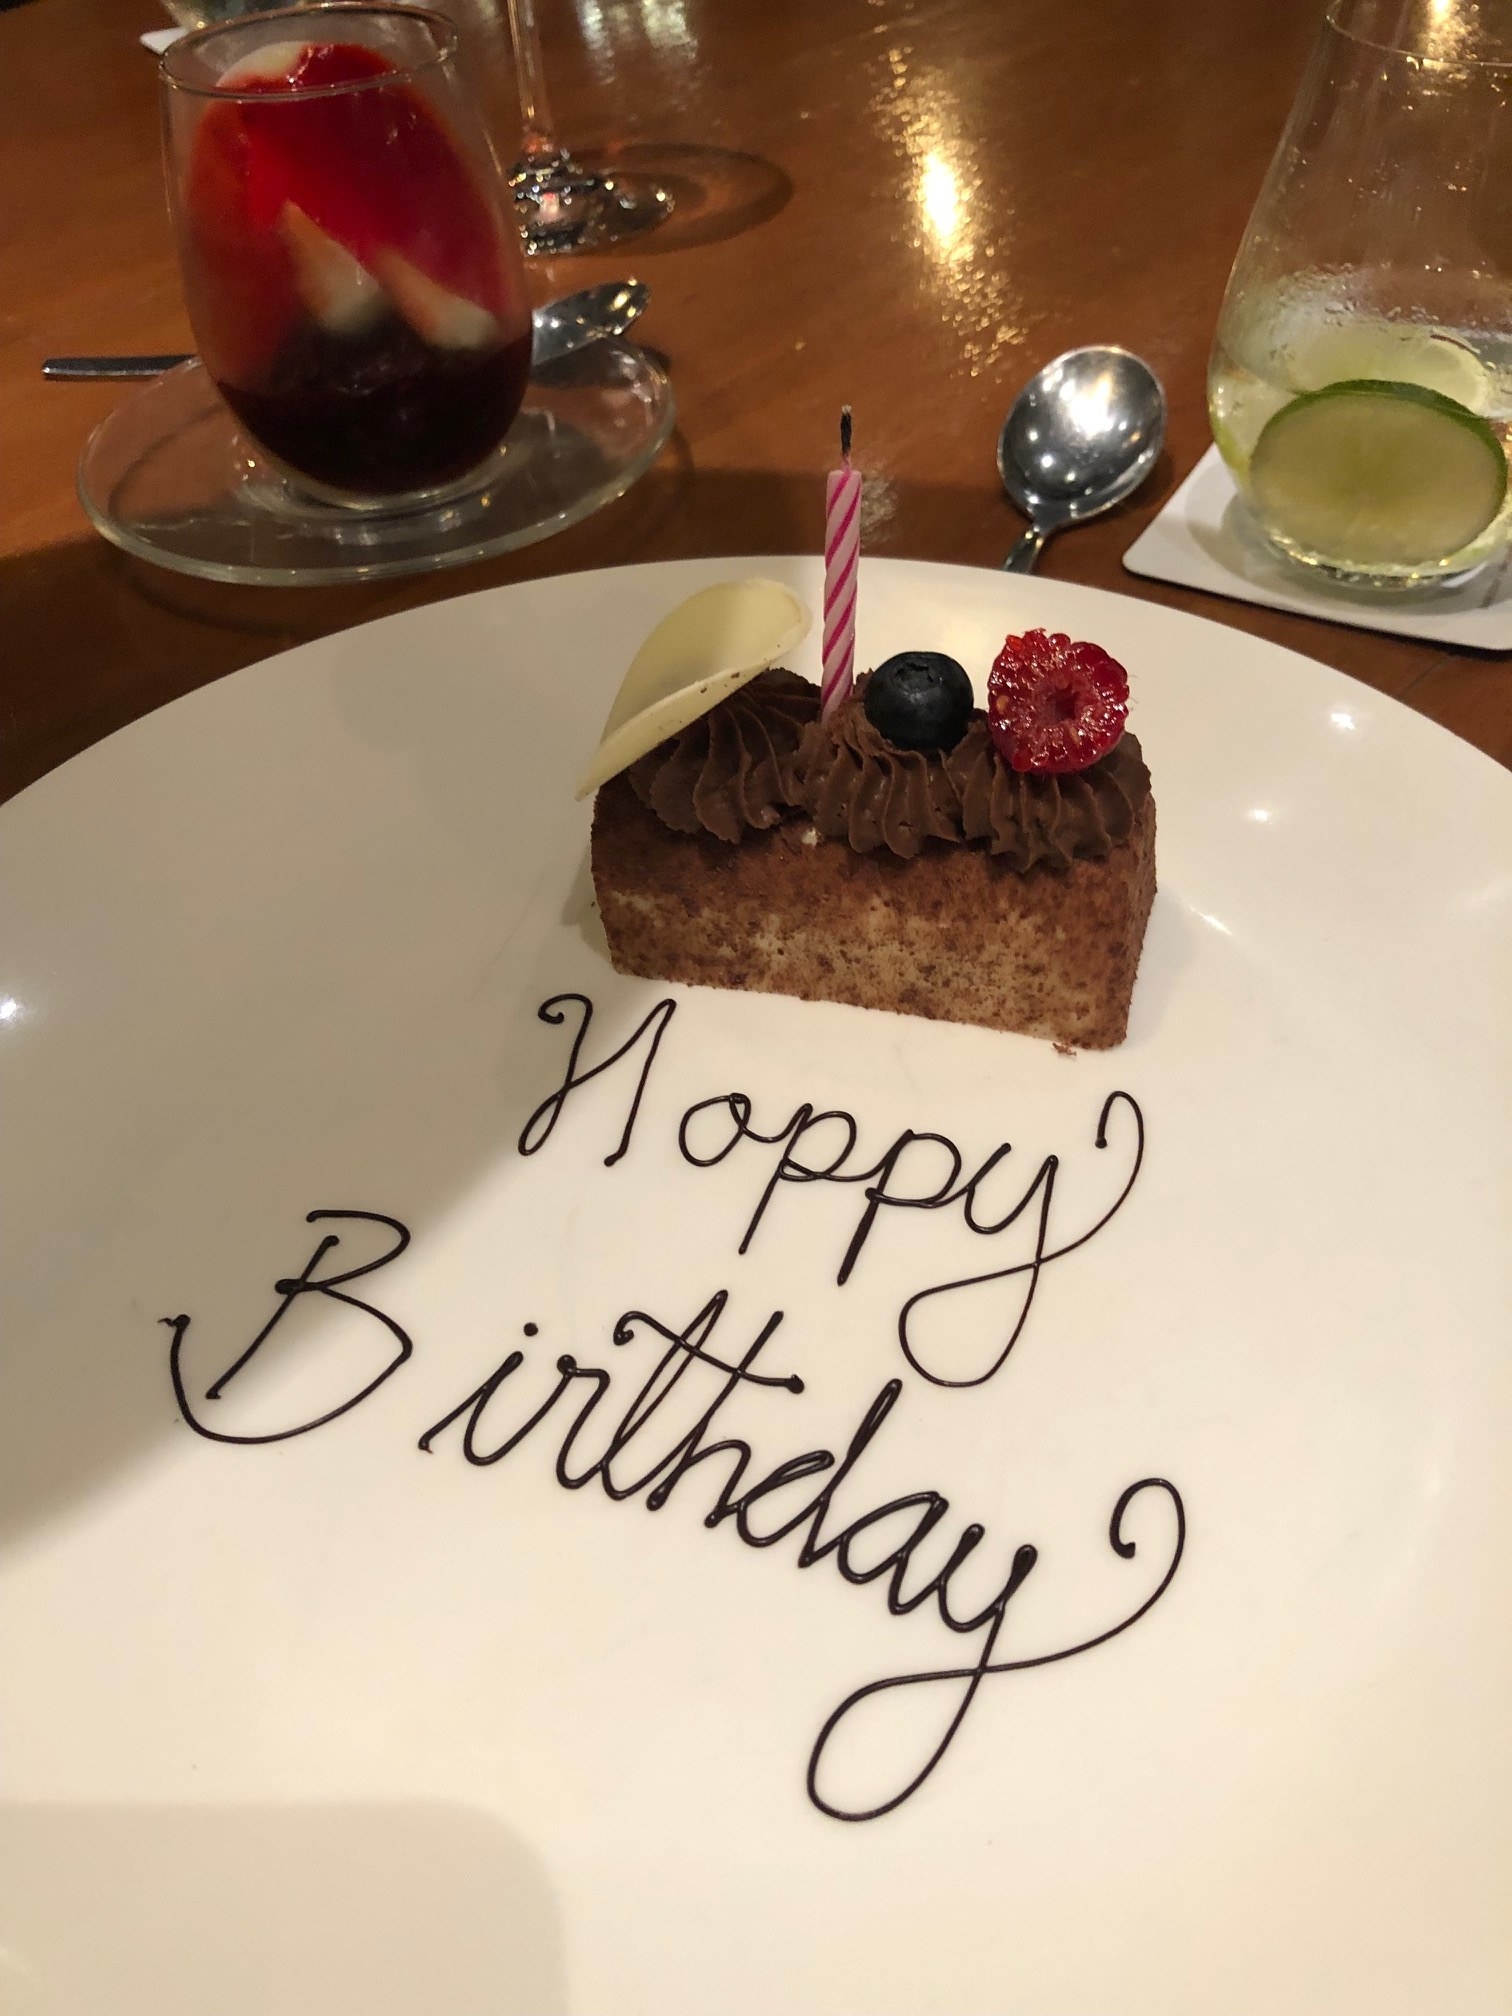 &quot;Happy Birthday&quot; written on the dessert plate